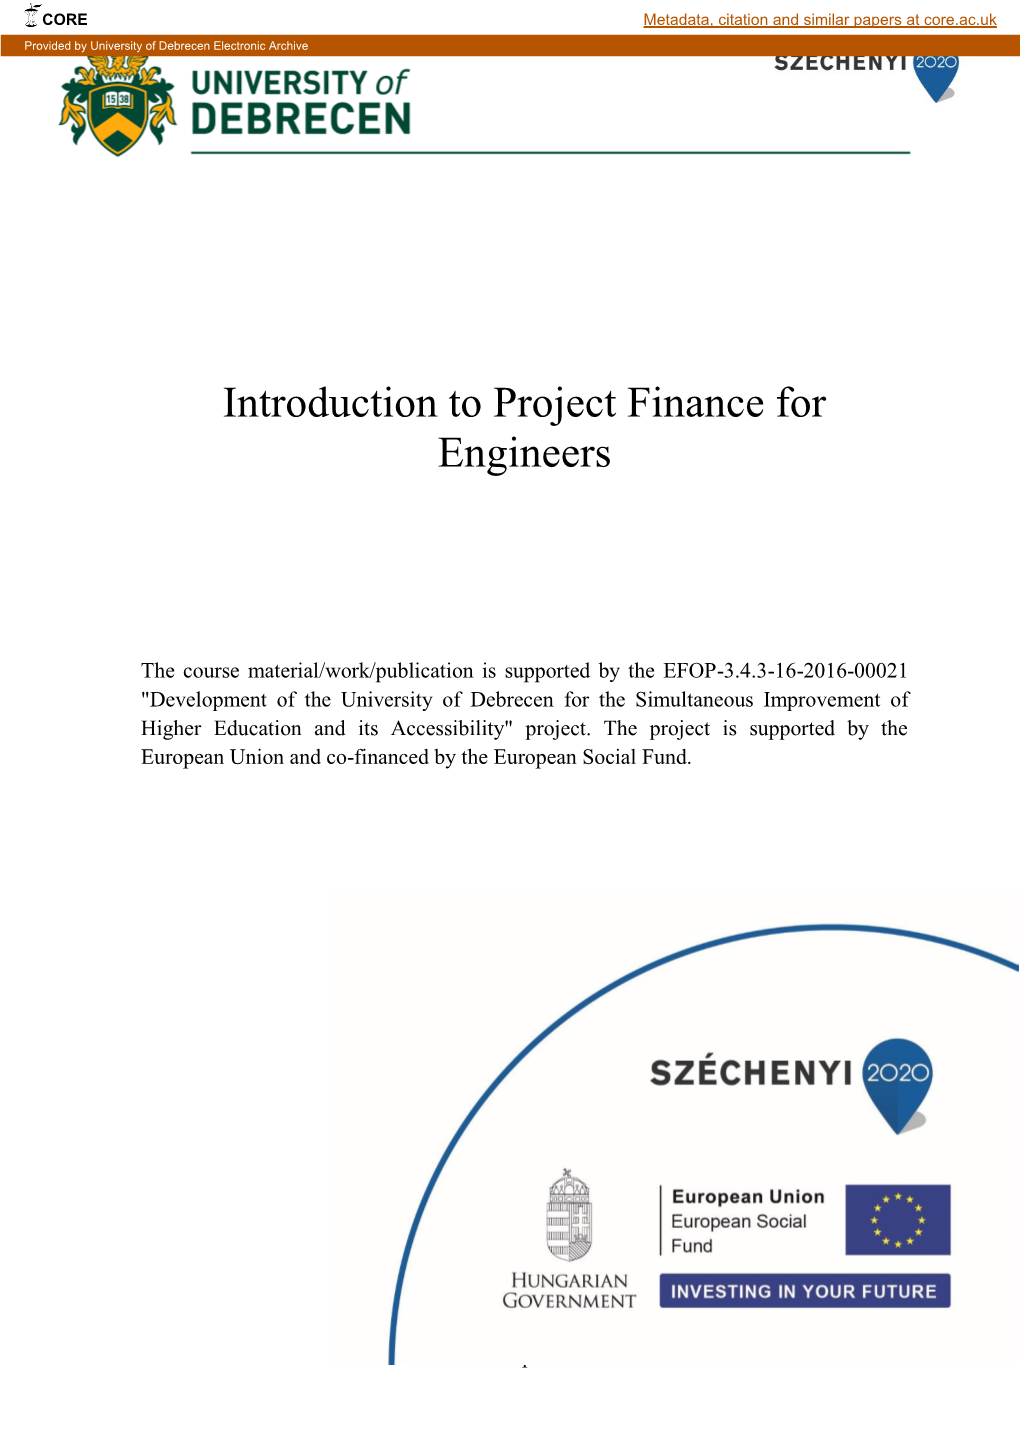 Introduction to Project Finance for Engineers